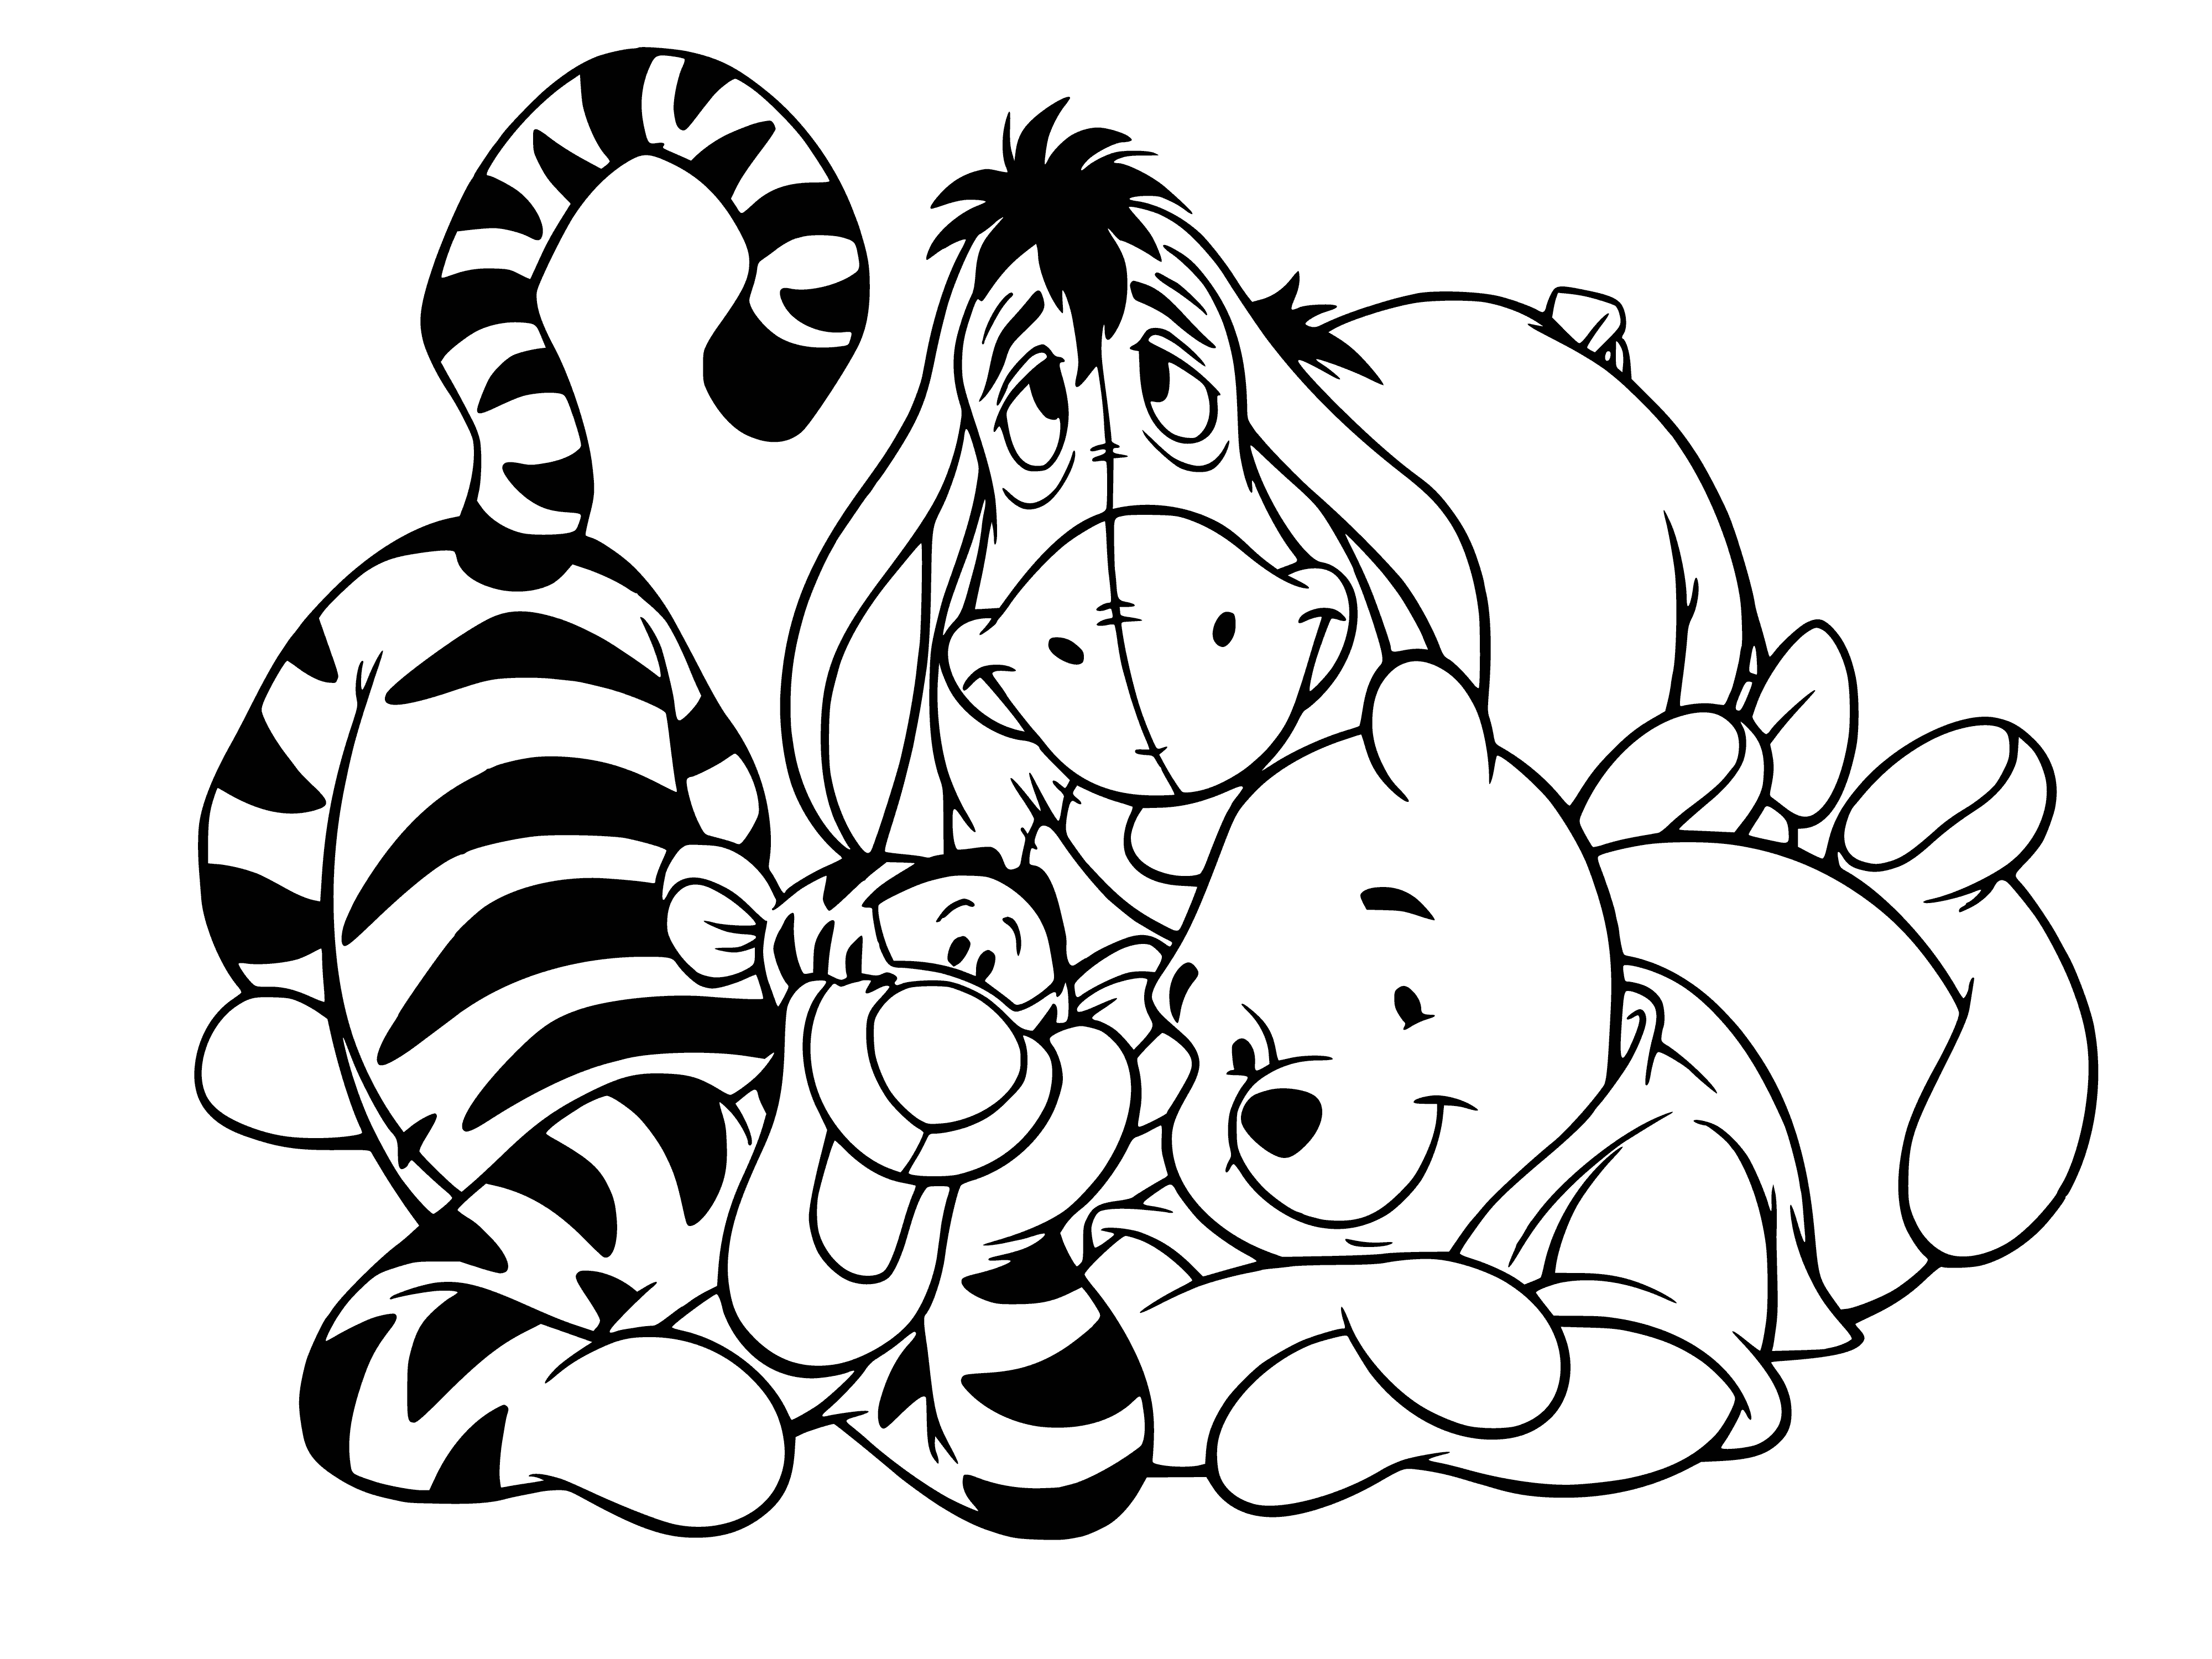 coloring page: Tiger cub, donkey, and bear cub in coloring page; Tiger cub lying on ground, bear cub looks like trying to climb on donkey's back.